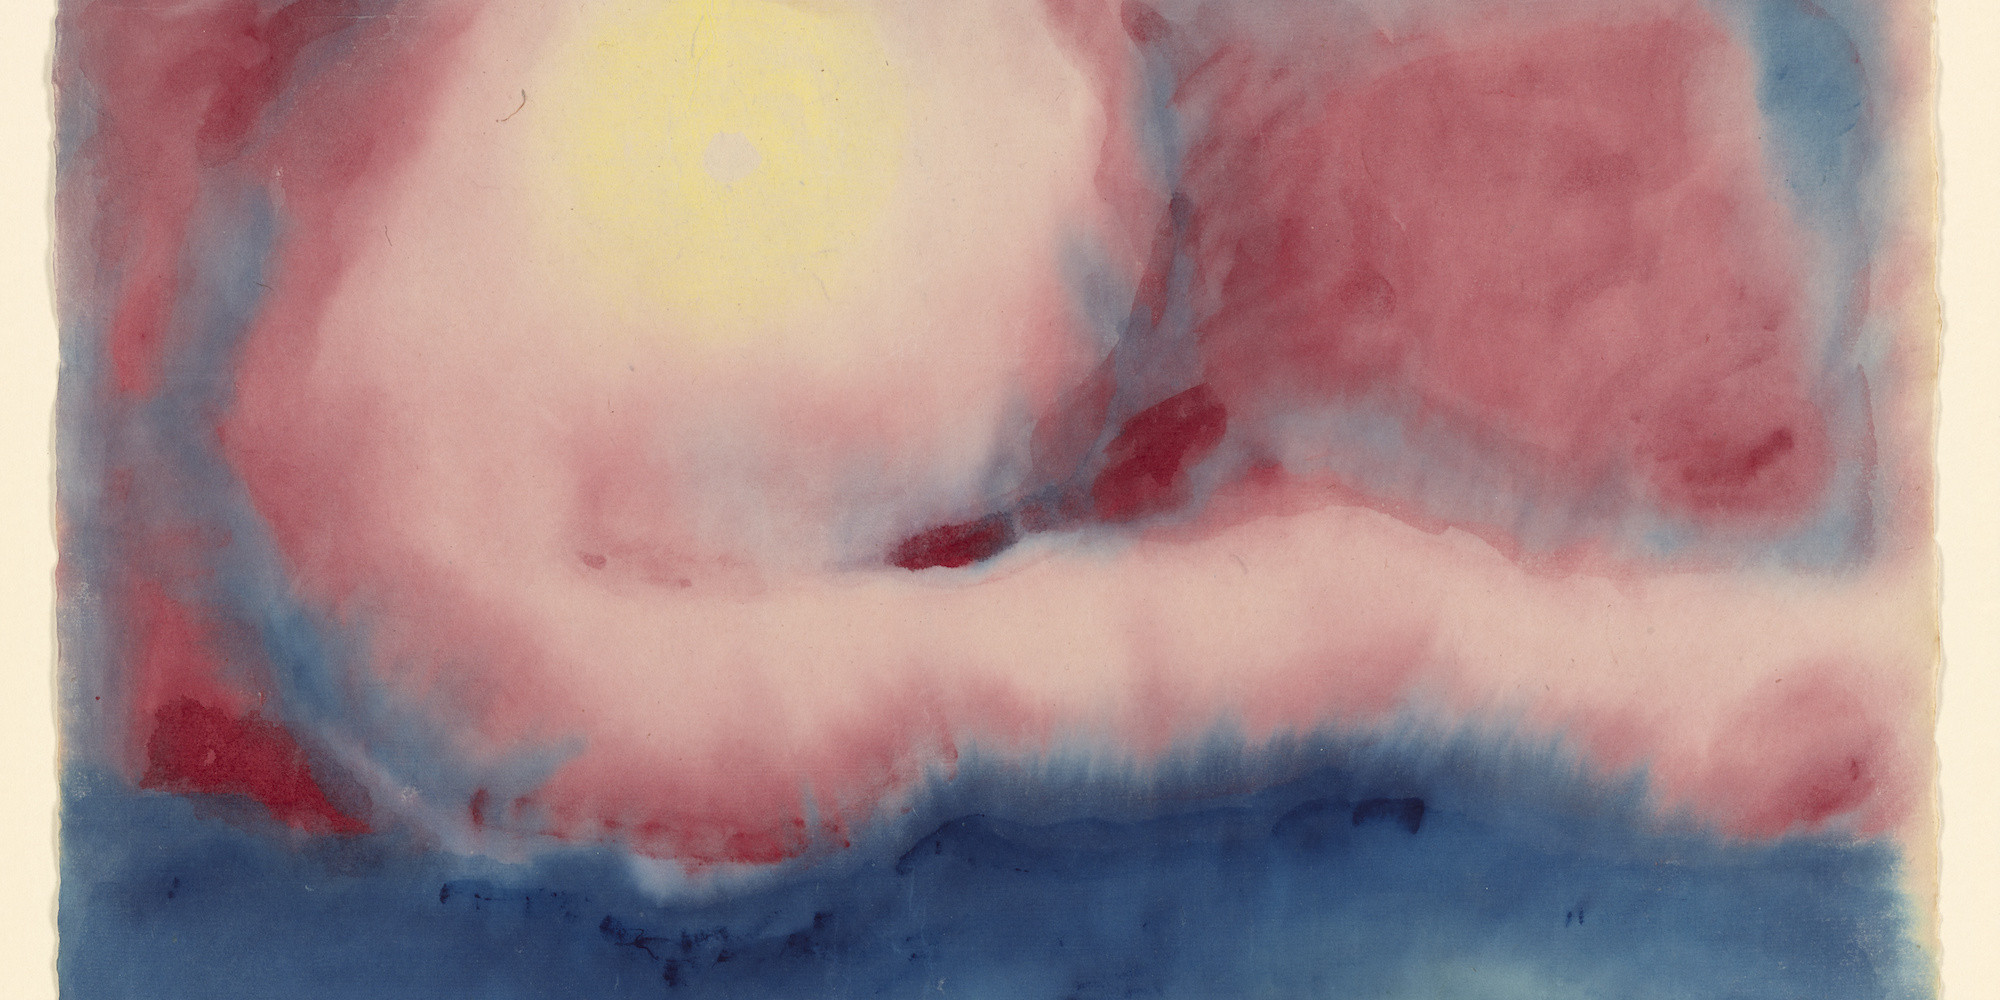 Georgia O’Keeffe. Evening Star. 1917. Watercolor on paper, 13 3/8 × 17 11/16&#34; (34 × 45 cm). Yale University Art Gallery, New Haven, Connecticut. The John Hill Morgan, B.A. 1893, LL.B. 1896, M.A. (Hon.) 1929, Fund, the Leonard C. Hanna, Jr., Class of 1913, Fund, and Gifts of Friends in Honor of Theodore E. Stebbins, Jr., B.A. © 2023 Georgia O’Keeffe Museum/Artists Rights Society (ARS), New York